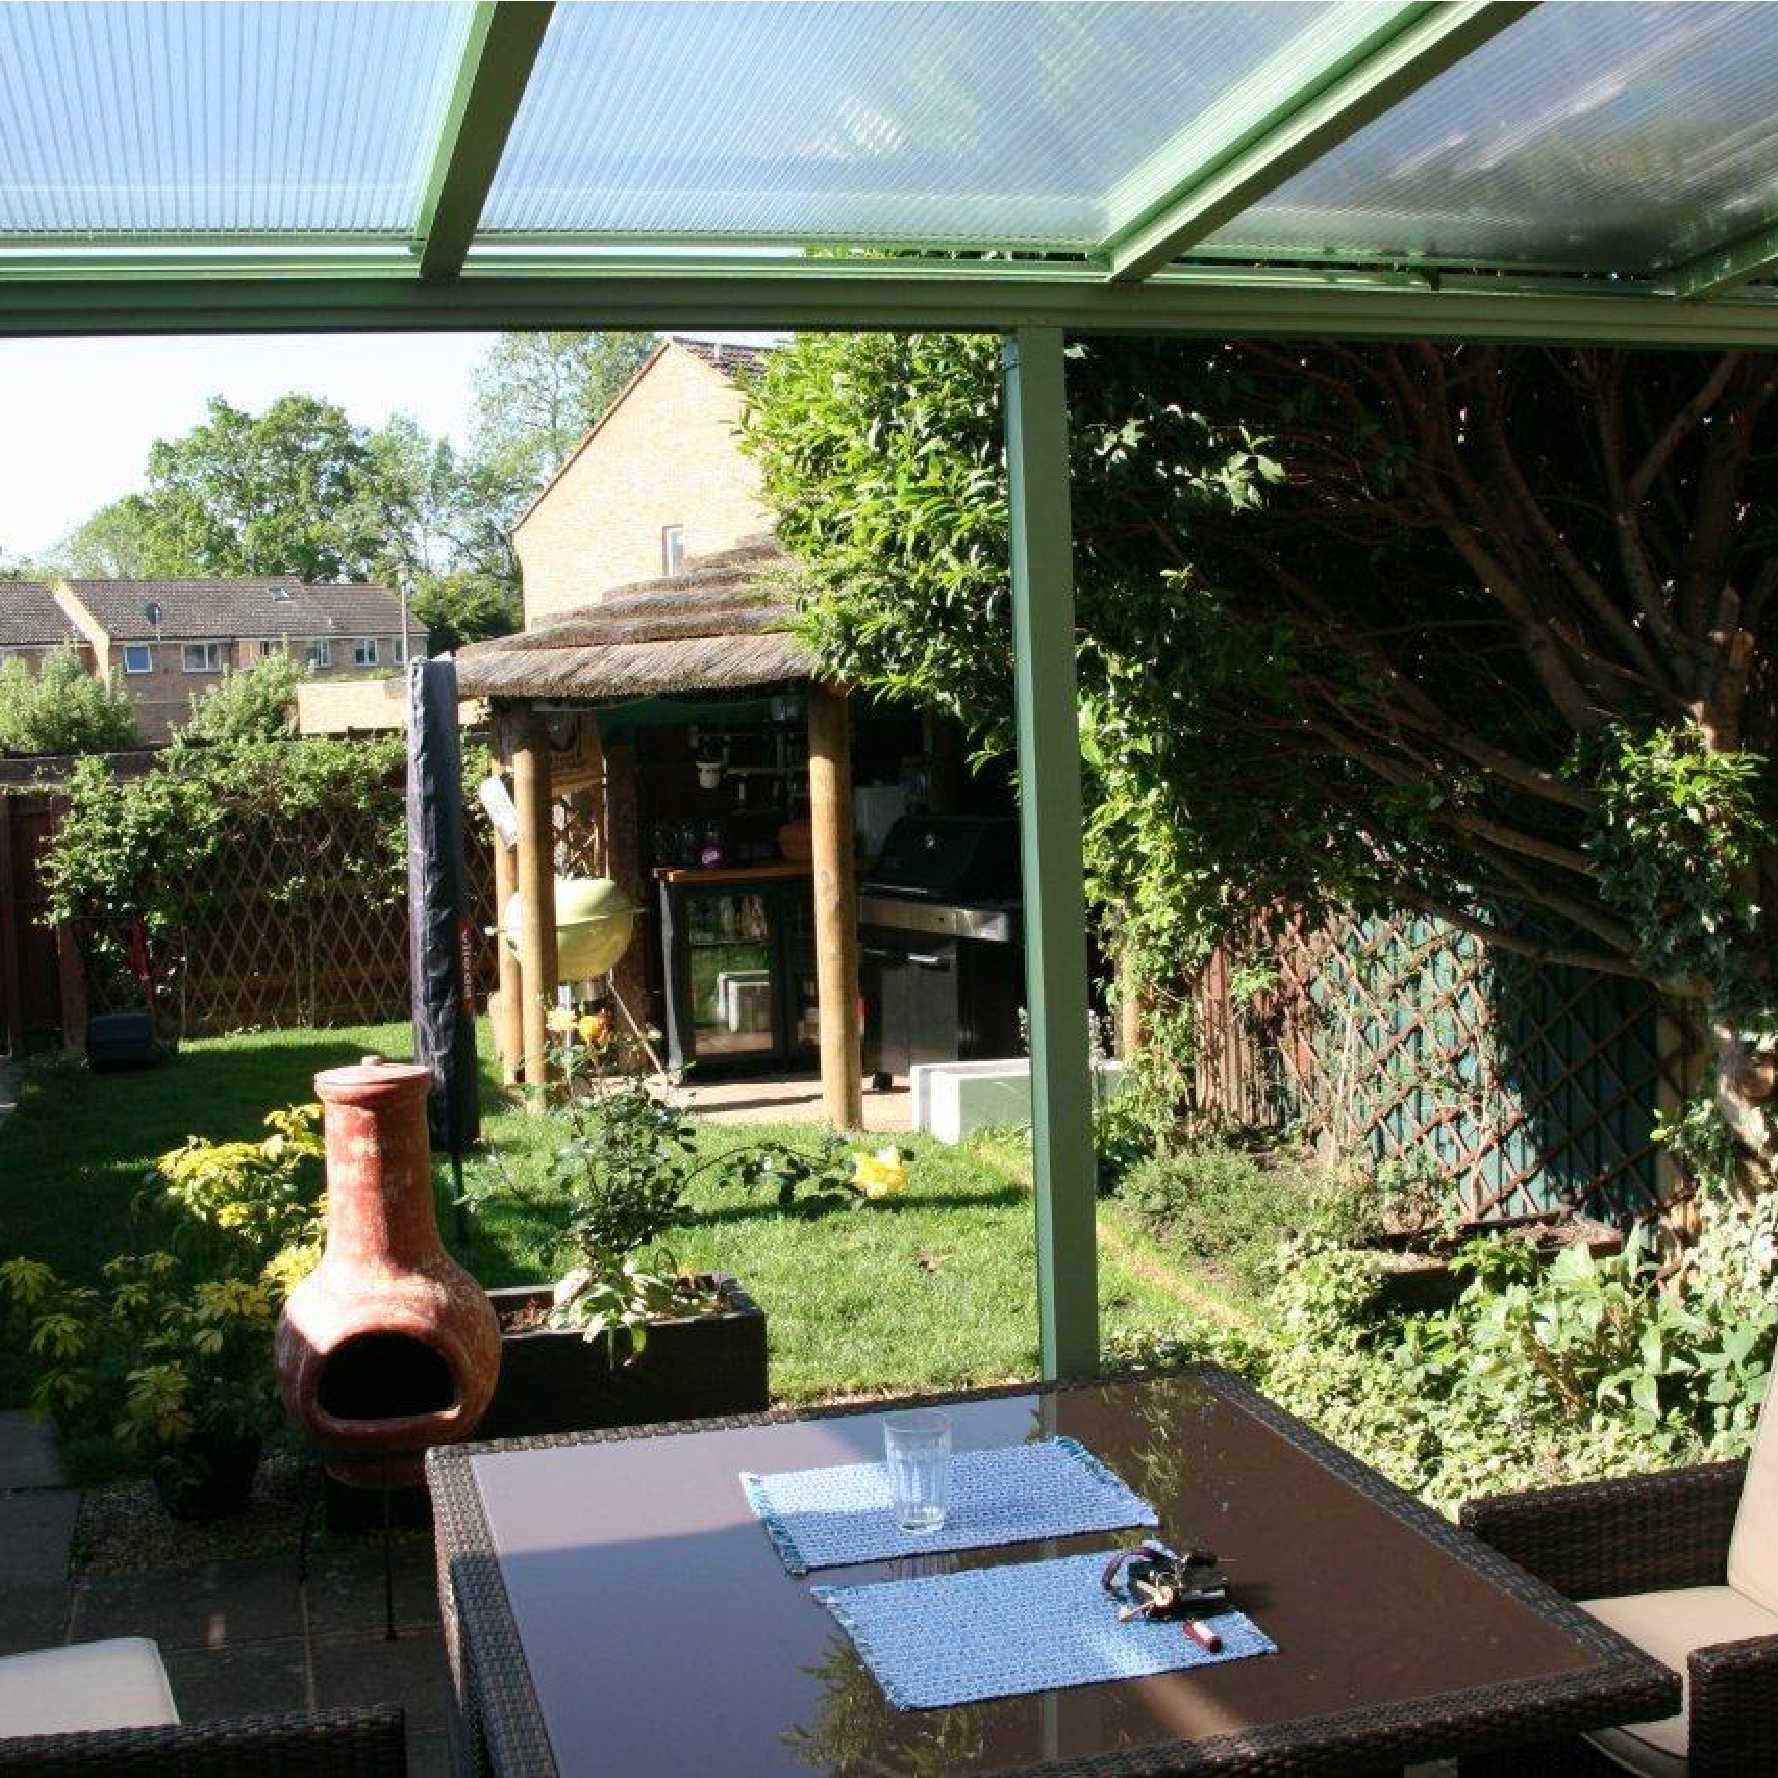 Affordable Omega Smart Lean-To Canopy, White with 16mm Polycarbonate Glazing - 12.0m (W) x 2.0m (P), (5) Supporting Posts